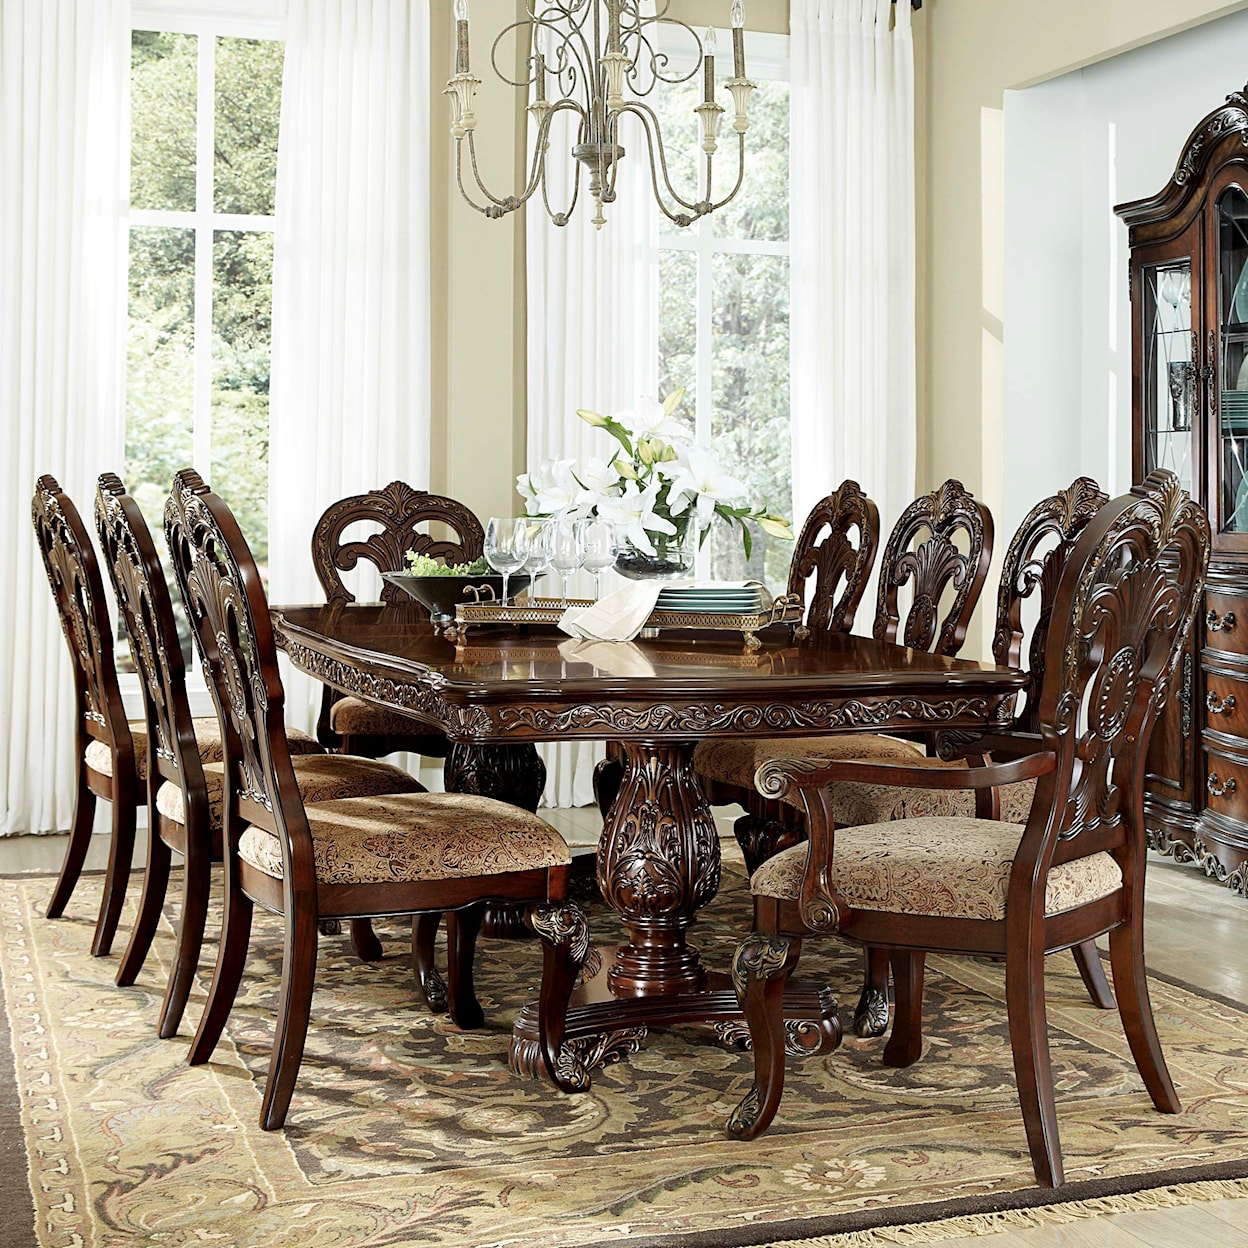 Homelegance Furniture Deryn Park Dining Table and Chair Set